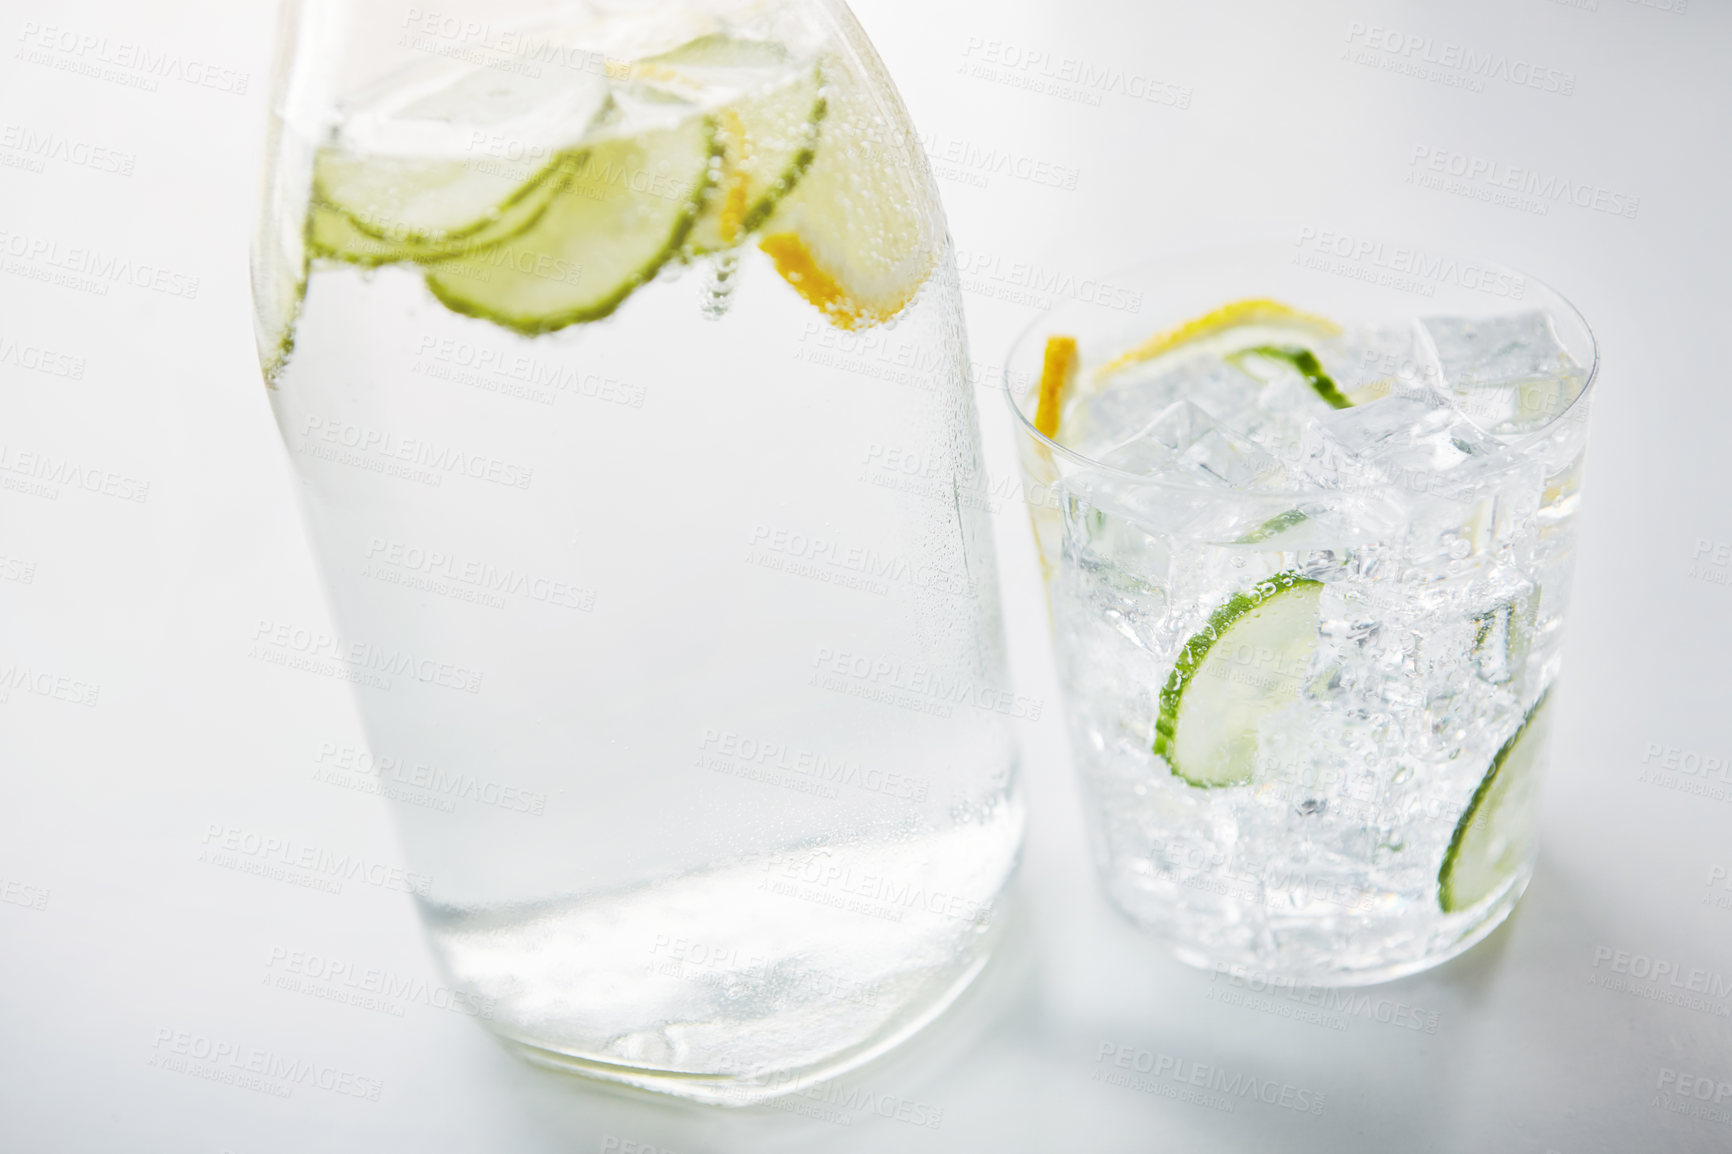 Buy stock photo Shot of a jug and glass of water with slices of lemon and cucumber in